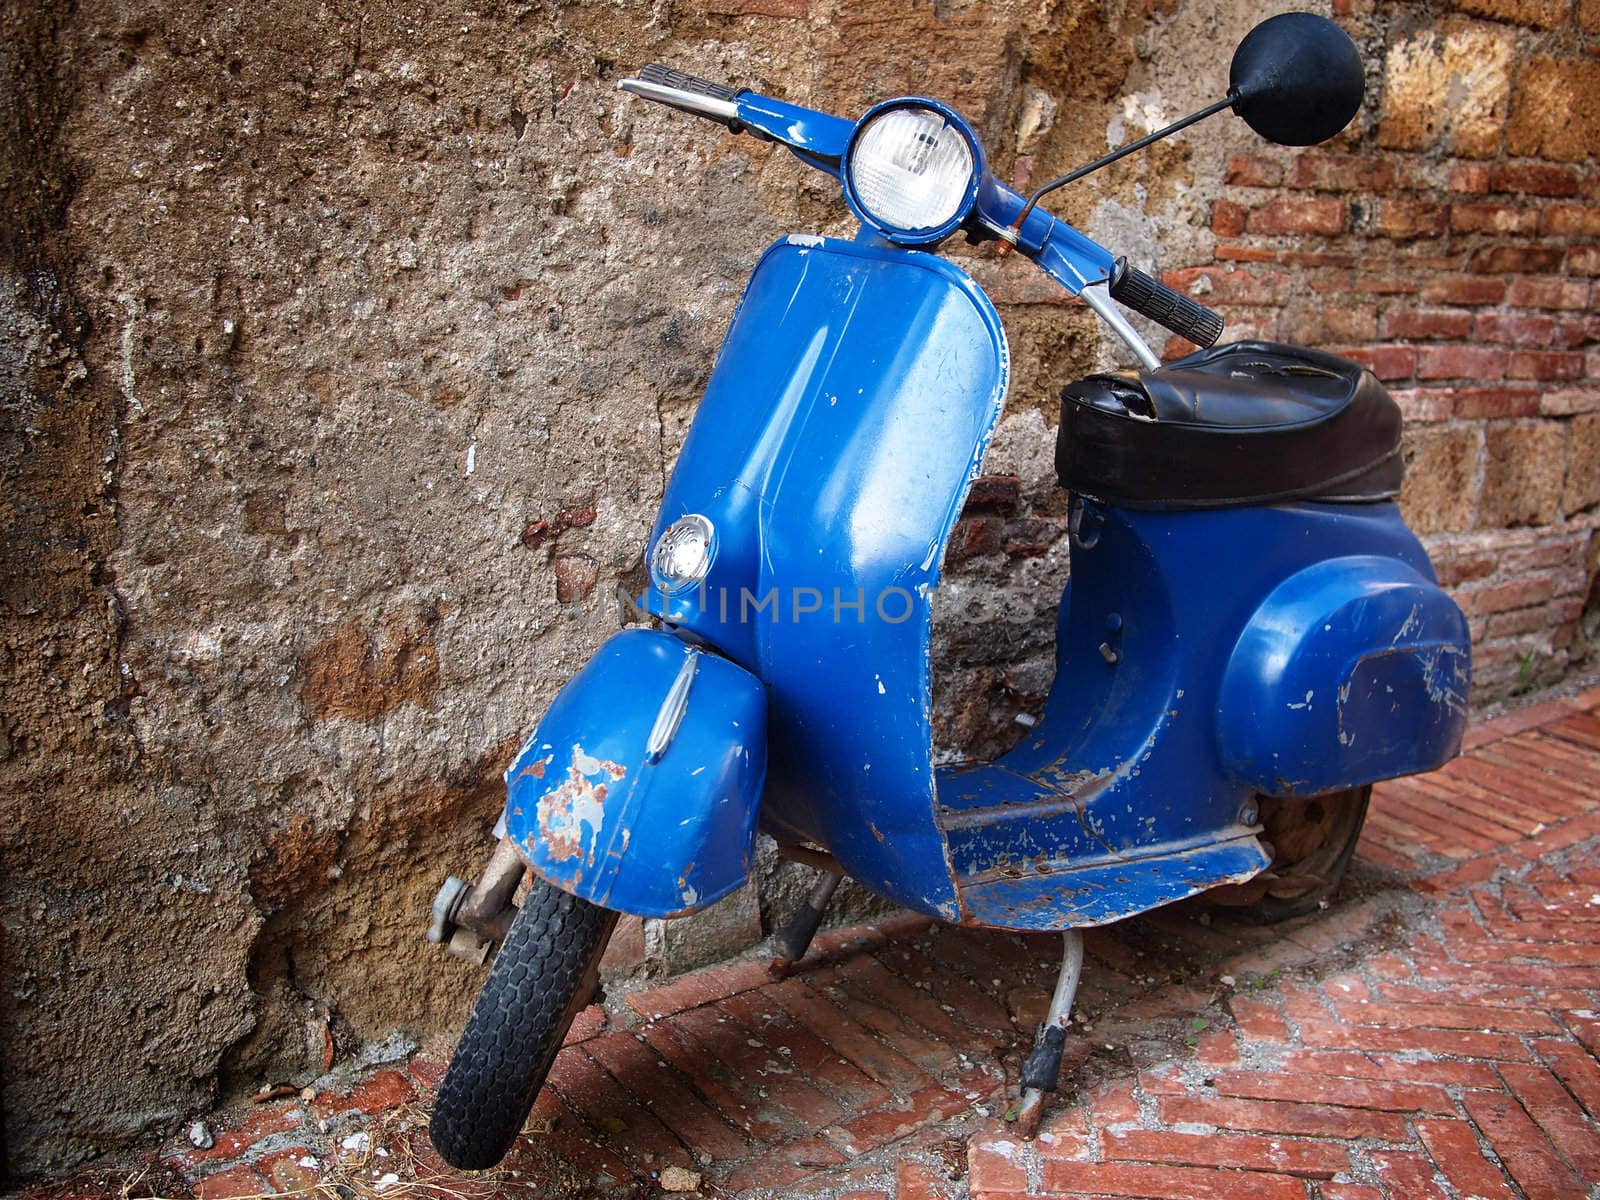 Typical italian retro style scooter parked in front of a brick wall.